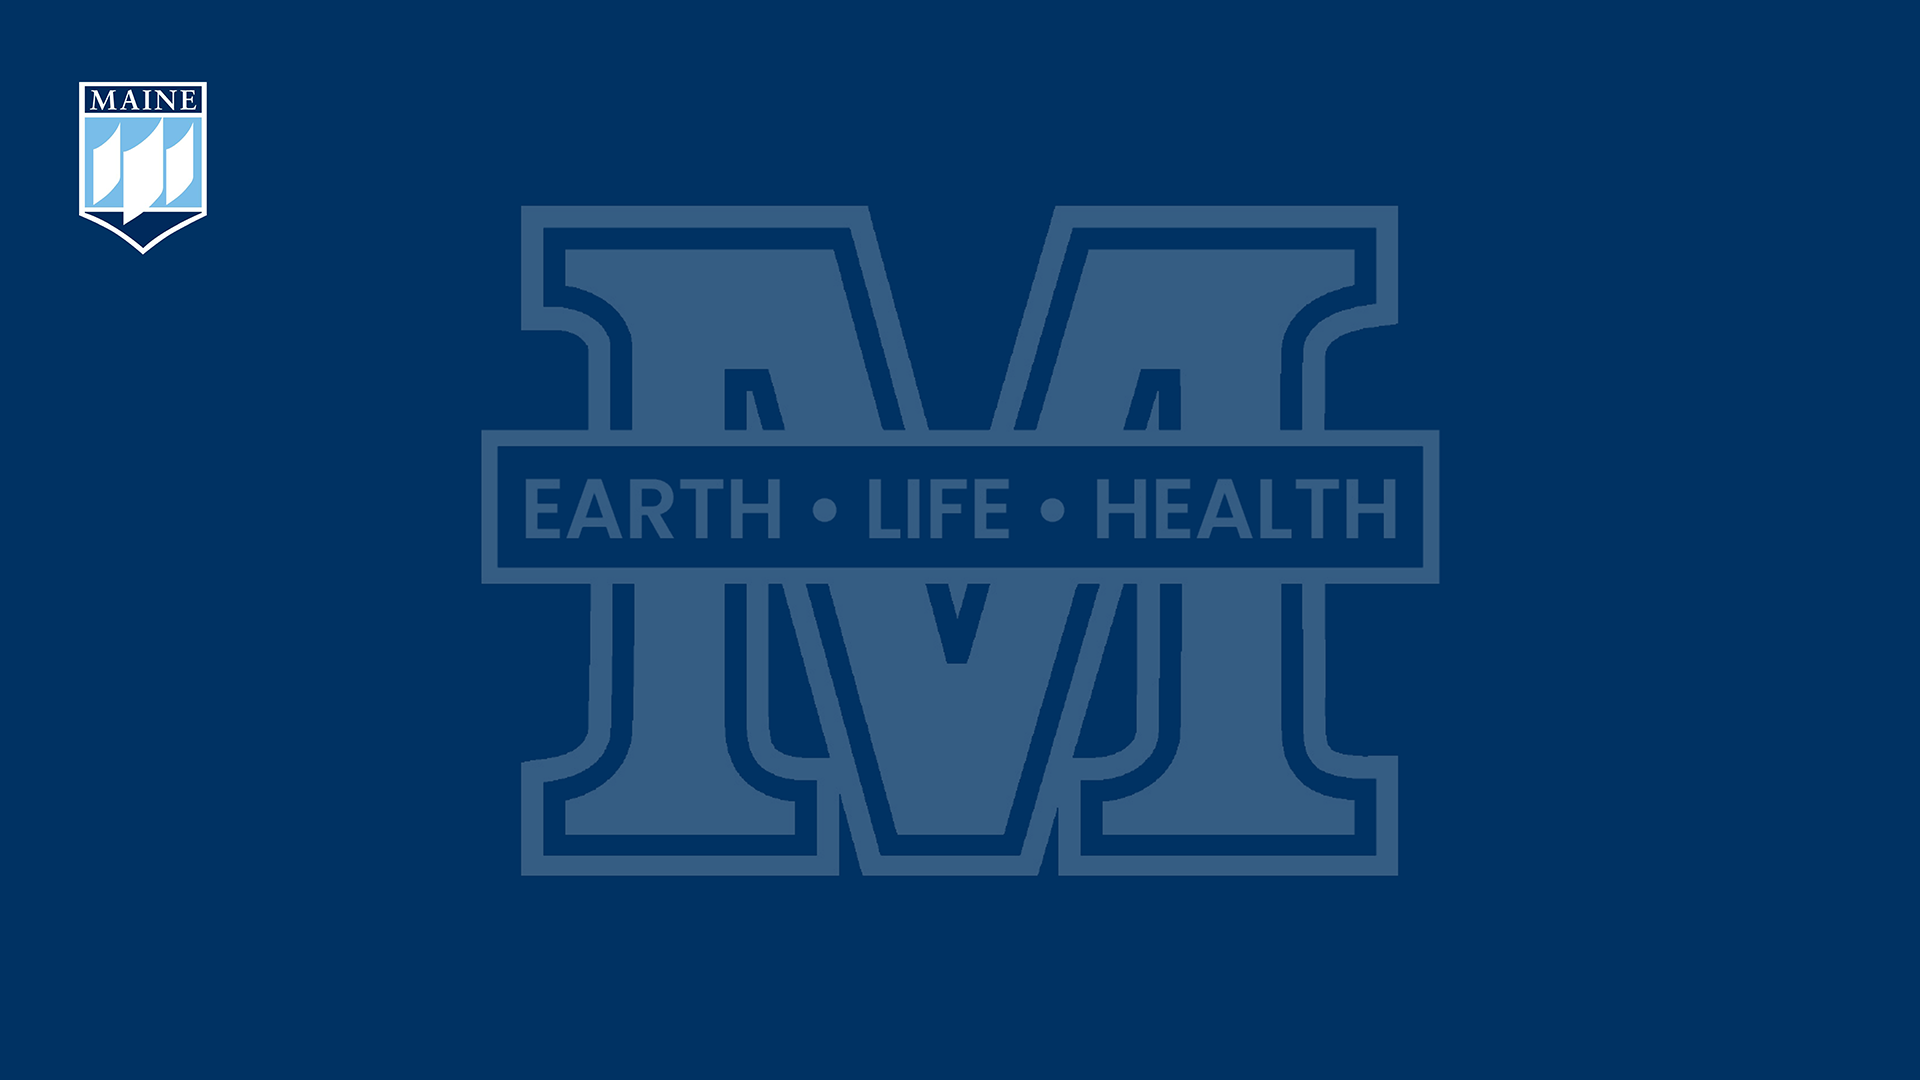 A navy blue zoom background with the UMaine crest and a transparent M logo with the words :Earth life health"